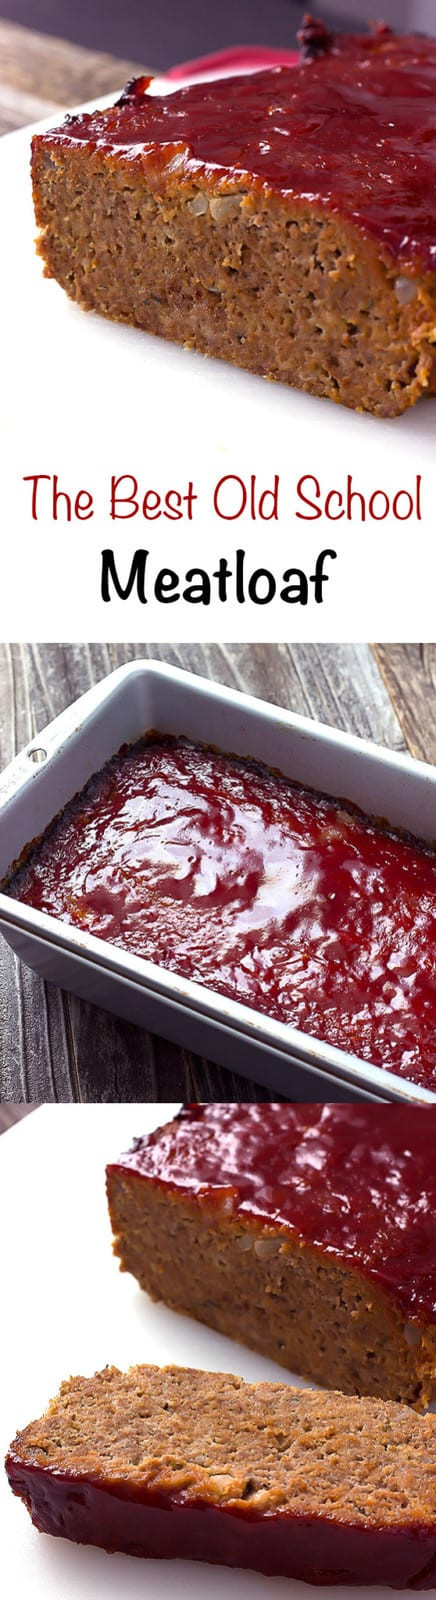 Meatloaf Recipe With Bread Crumbs
 The Best Classic Meatloaf The Wholesome Dish